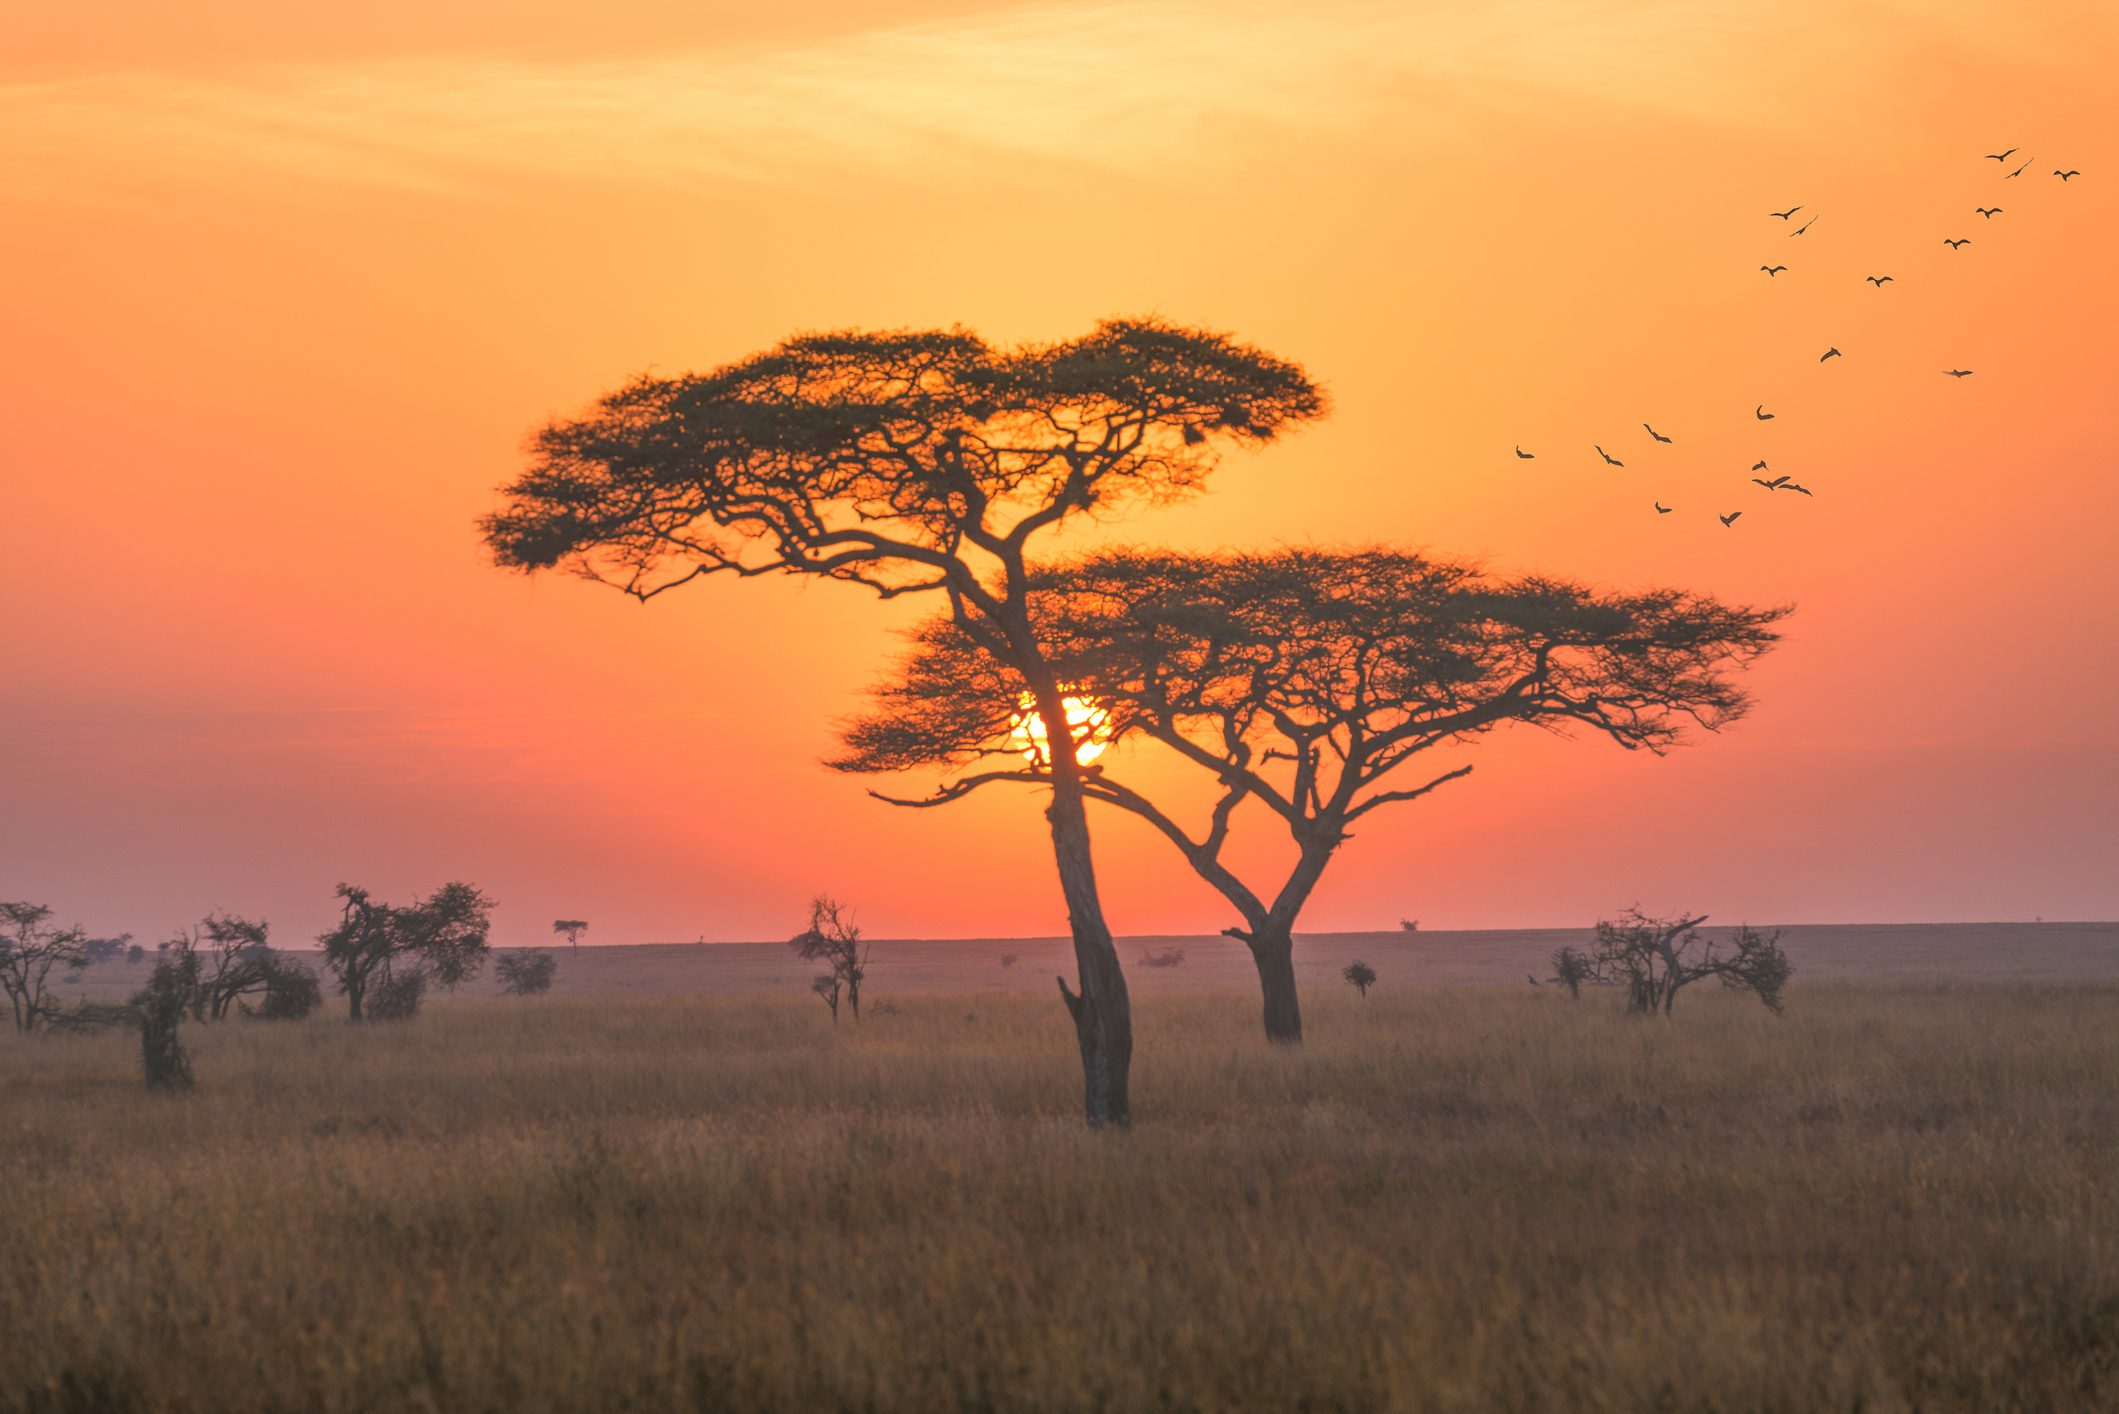 A landscape in the Serengeti national park, early morning with sunrise scence.